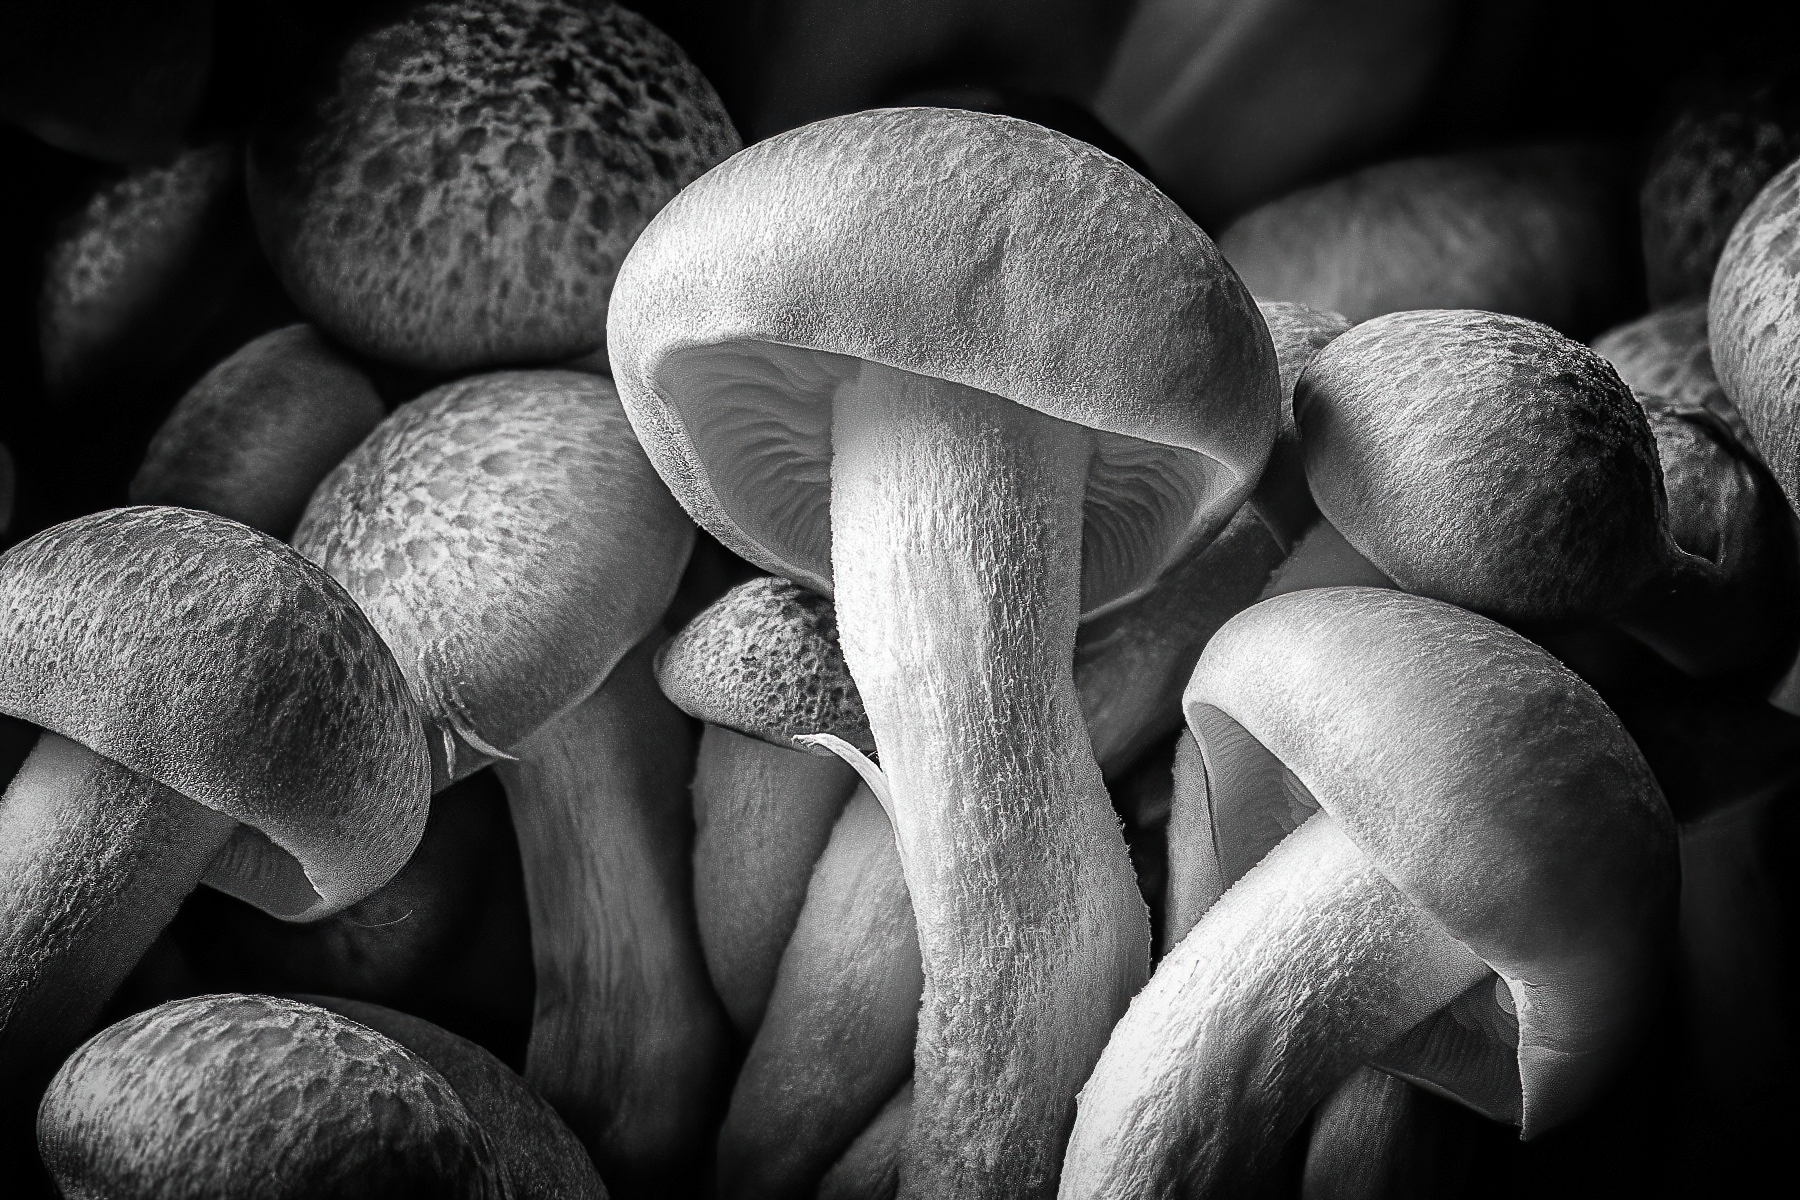 This is the winner and the critique of Sue's image was really positive.  The mushroom in the center is highlighted and super sharp.  As the other mushrooms go into the distance they lose light and focus.